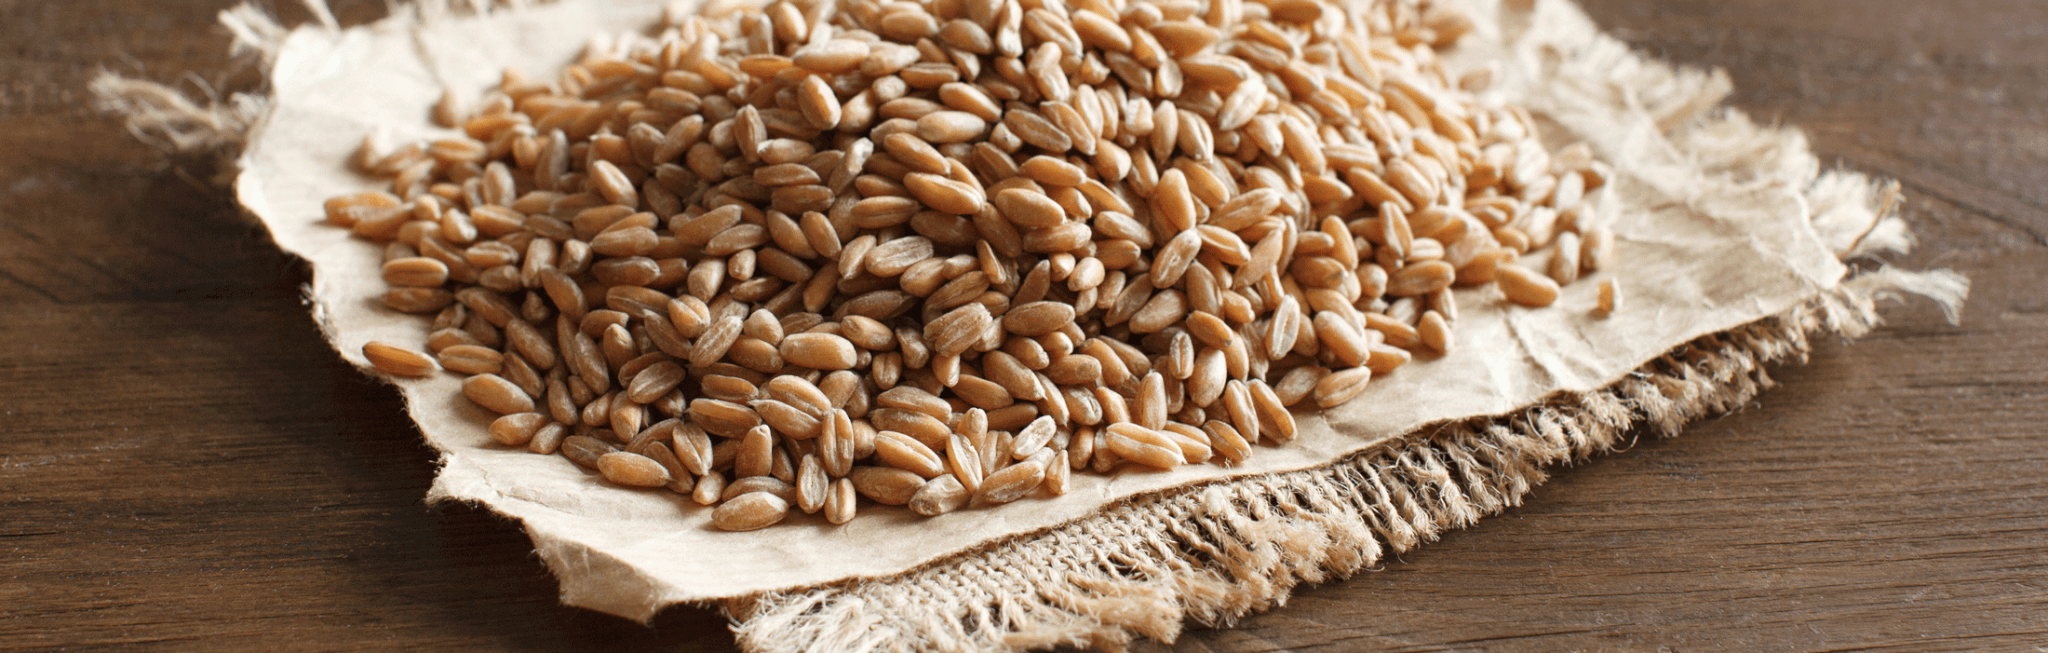 What You Need to Know About Gluten